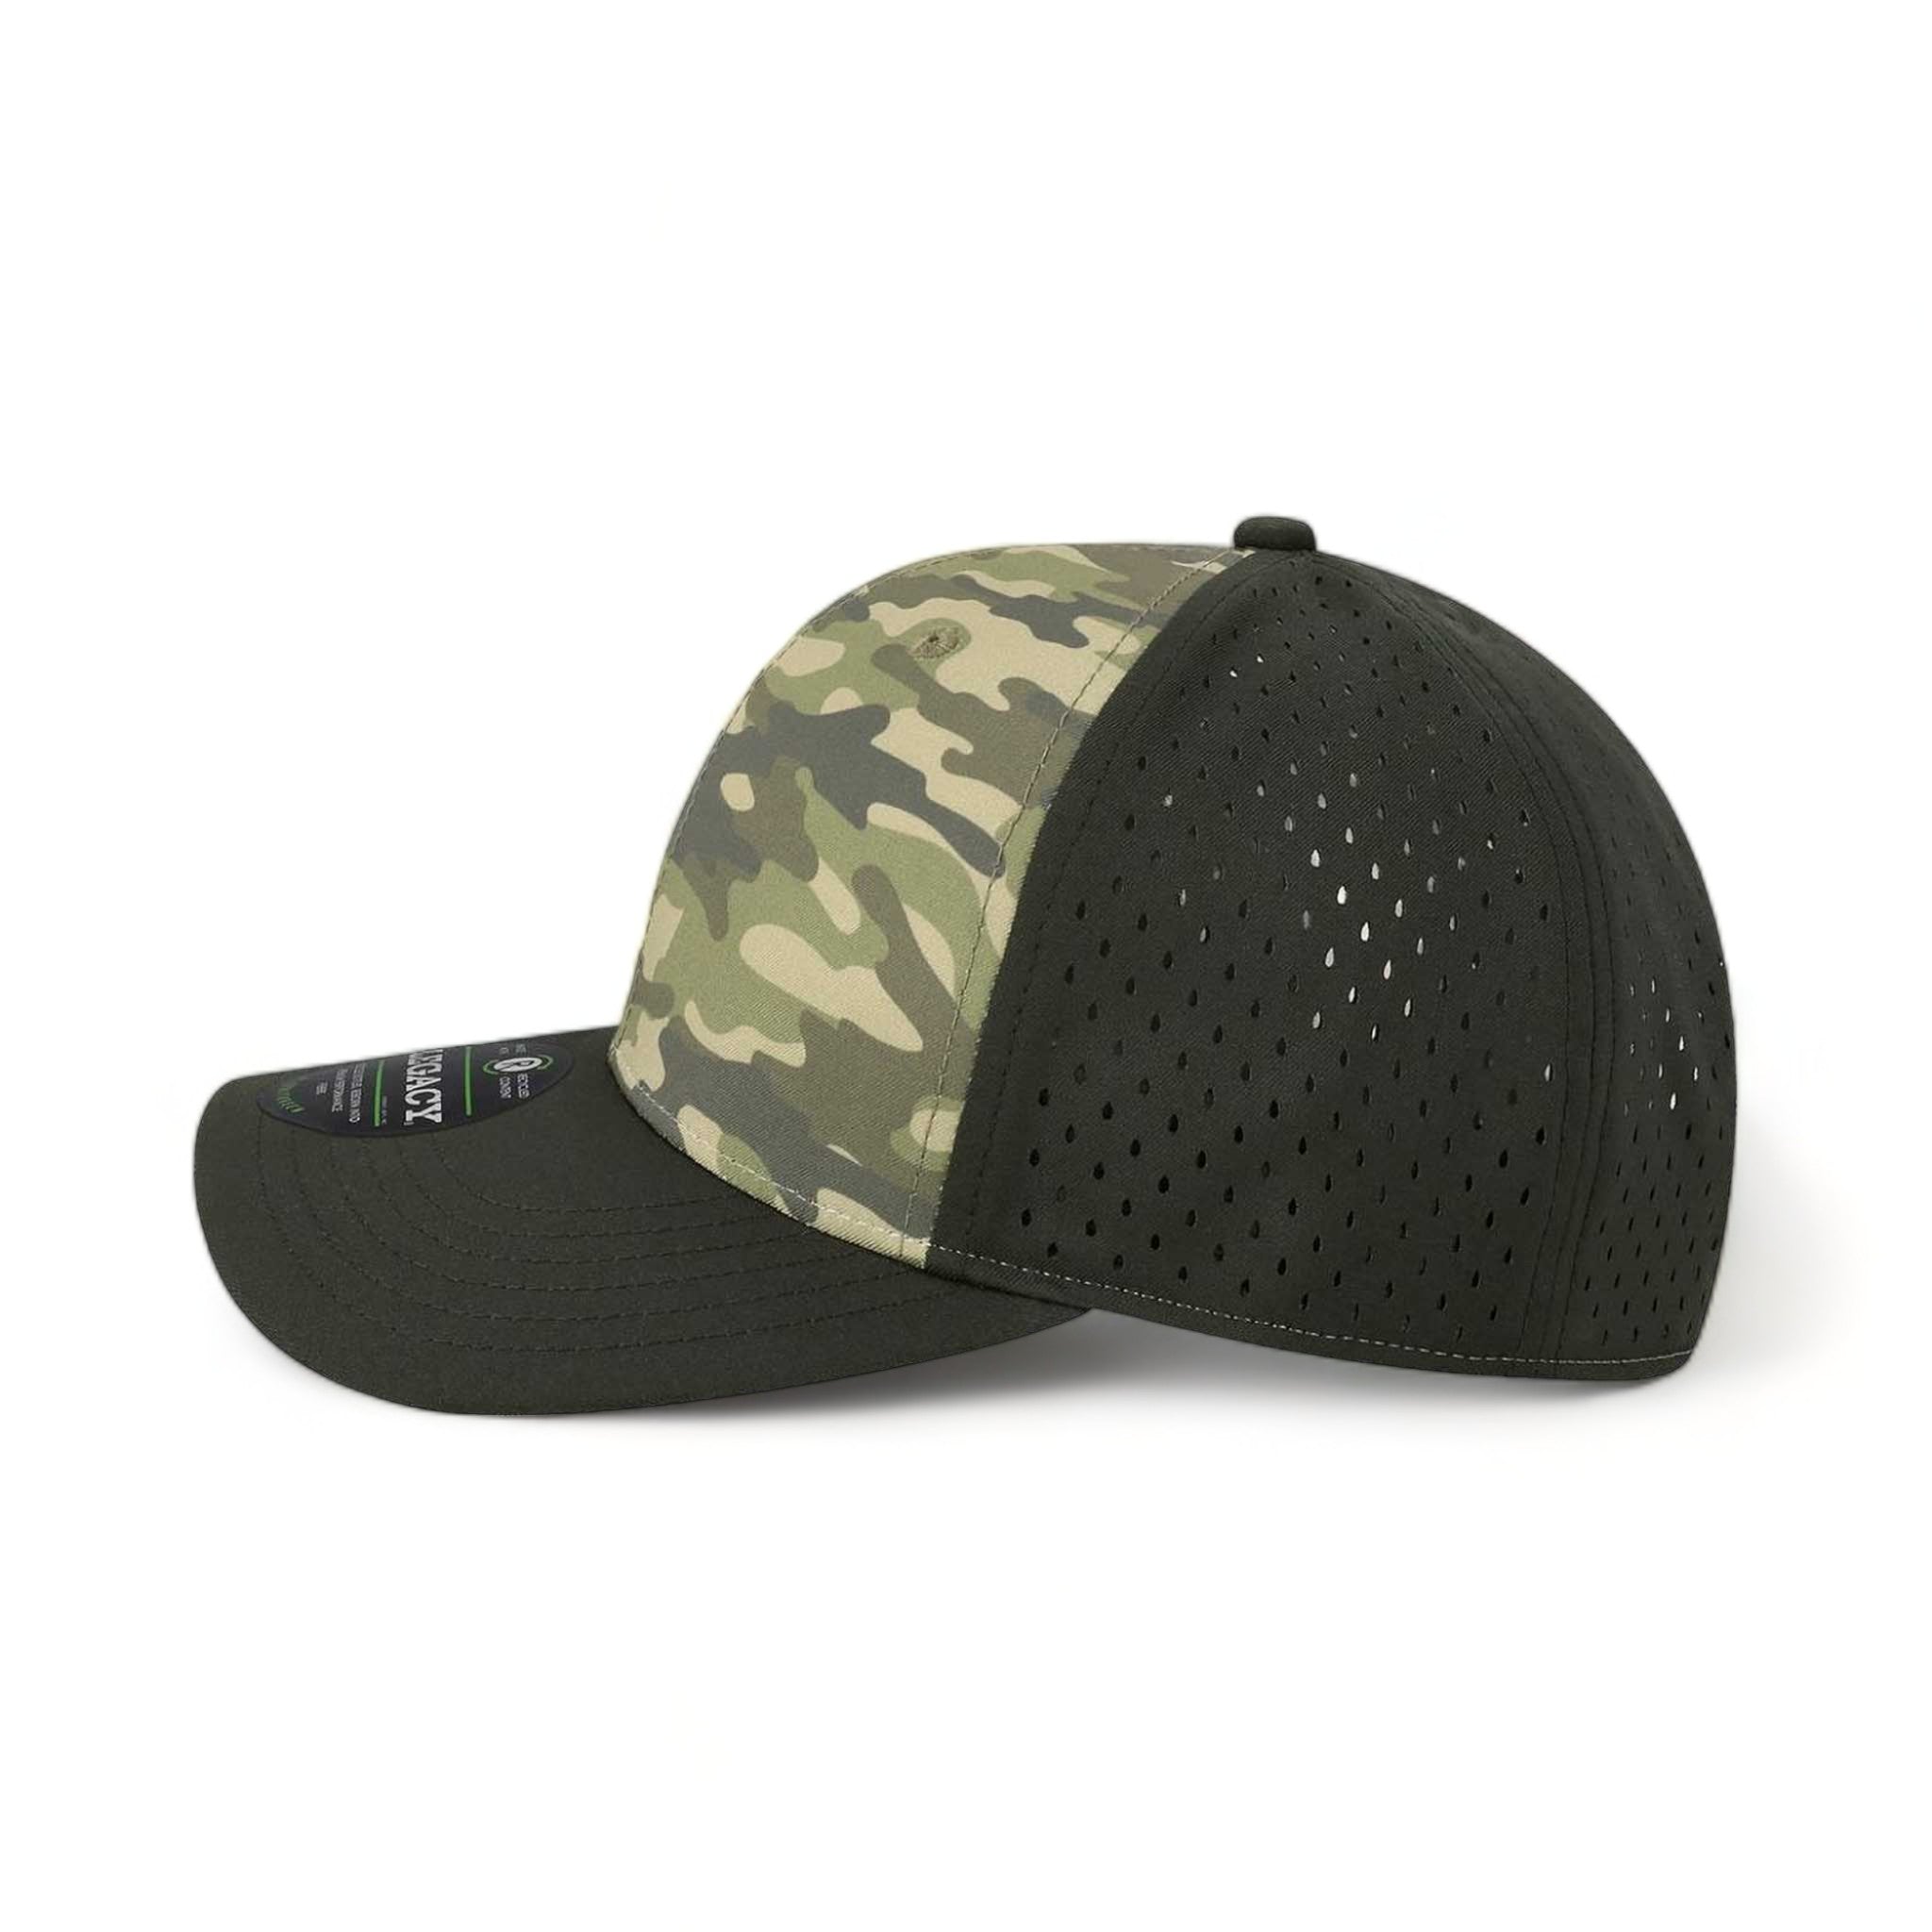 Side view of LEGACY REMPA custom hat in dark olive green camo and black